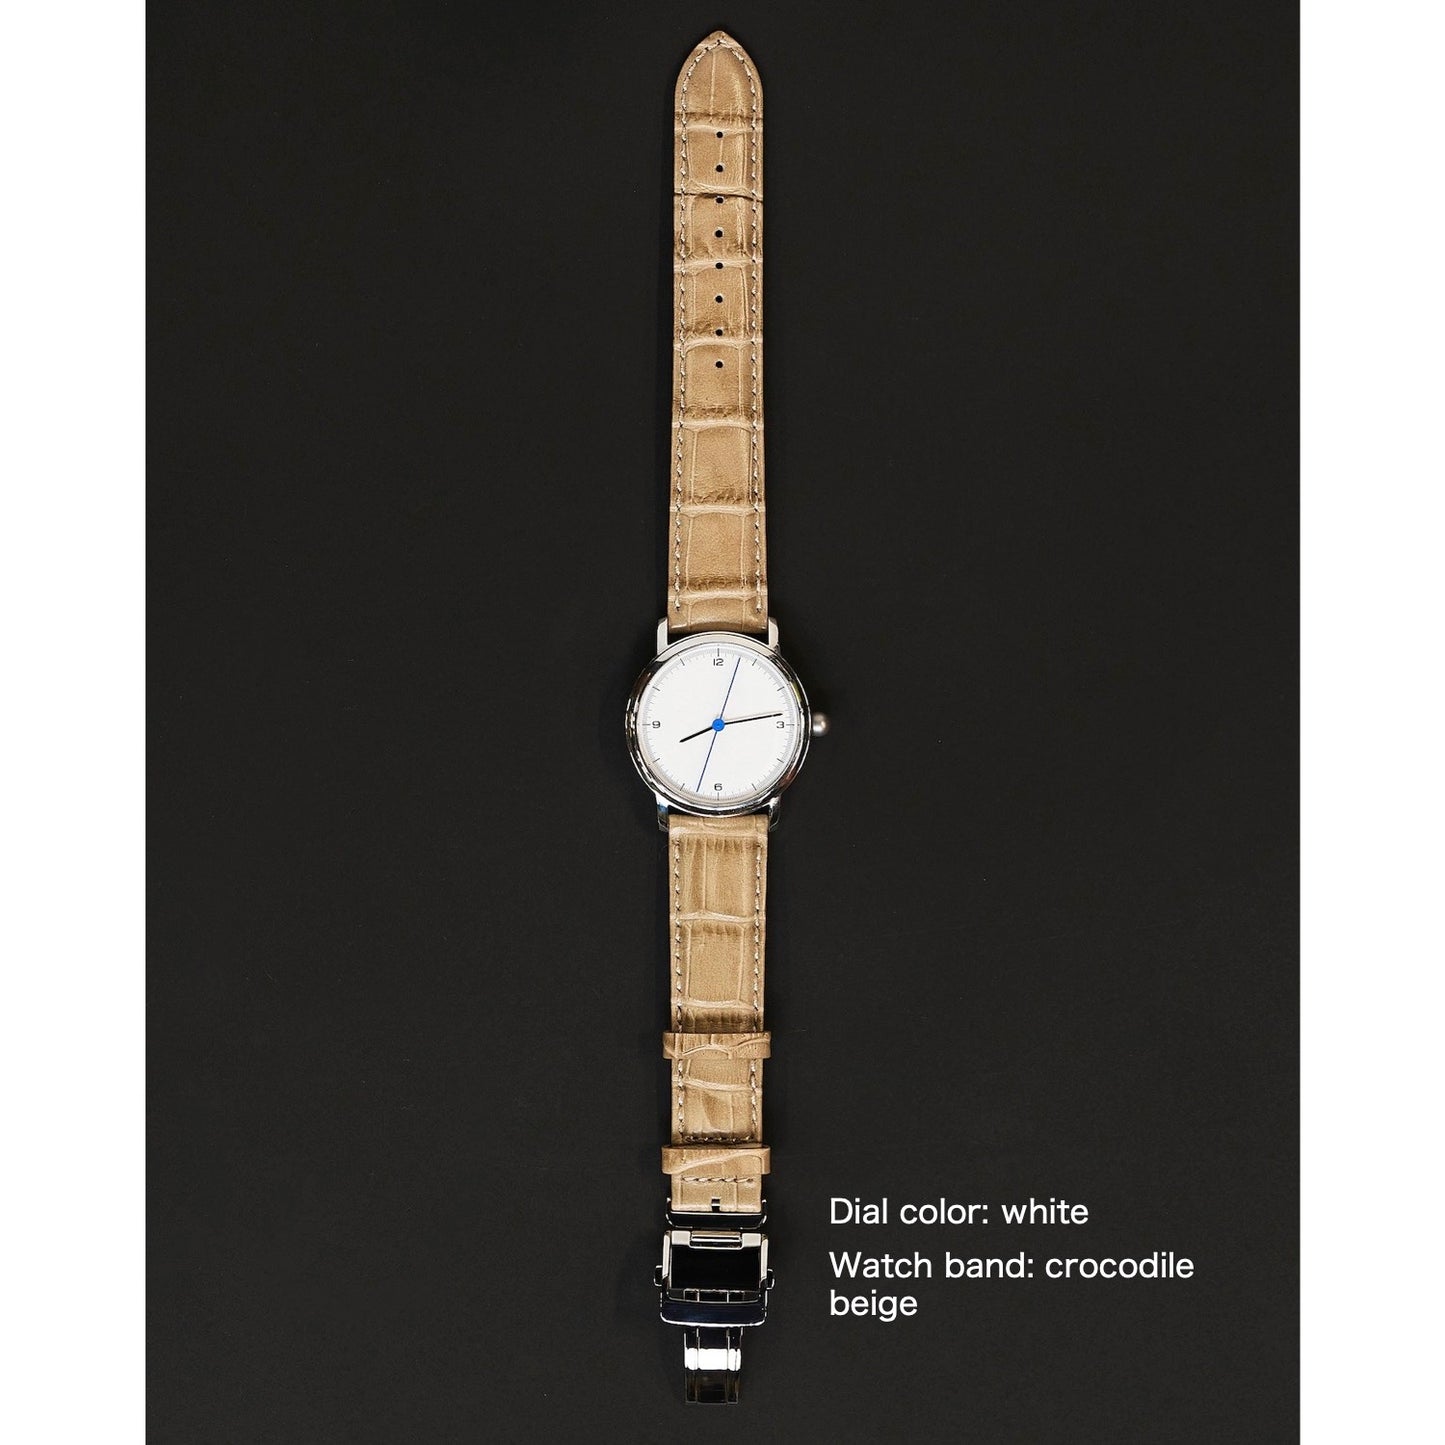 Dial color: white /  watch band: crocodile beige